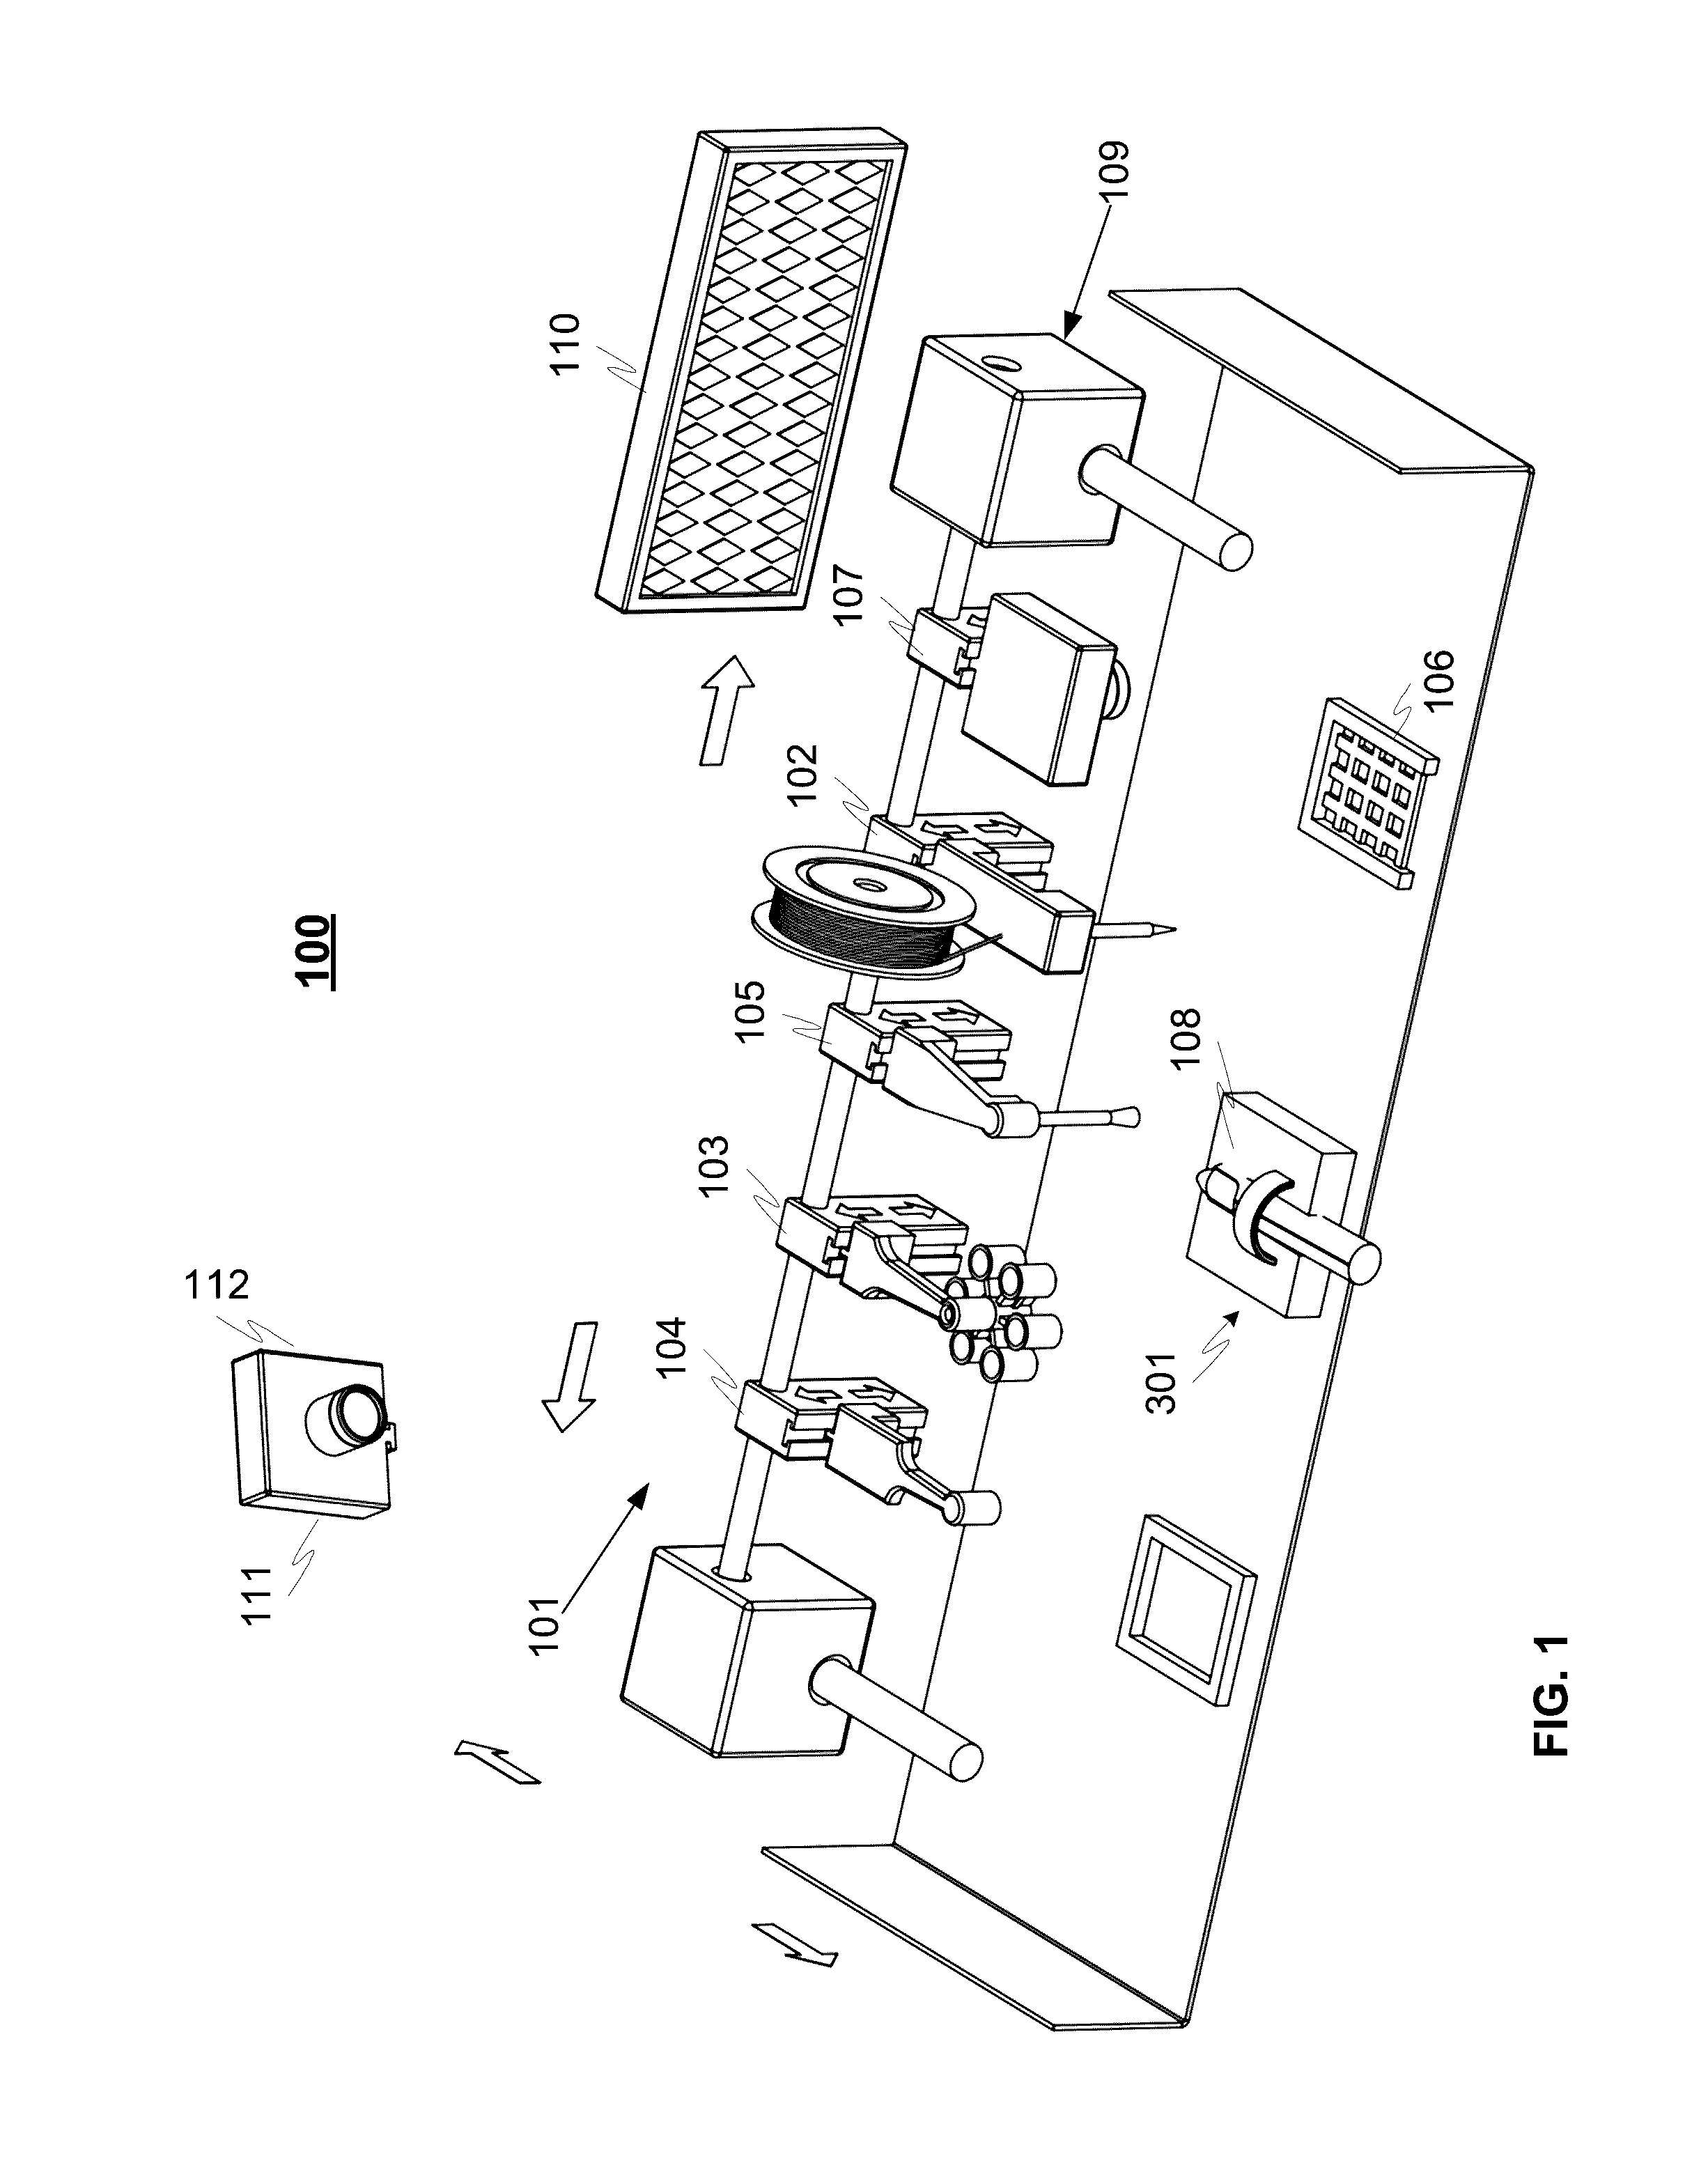 System and method for a nail manipulation